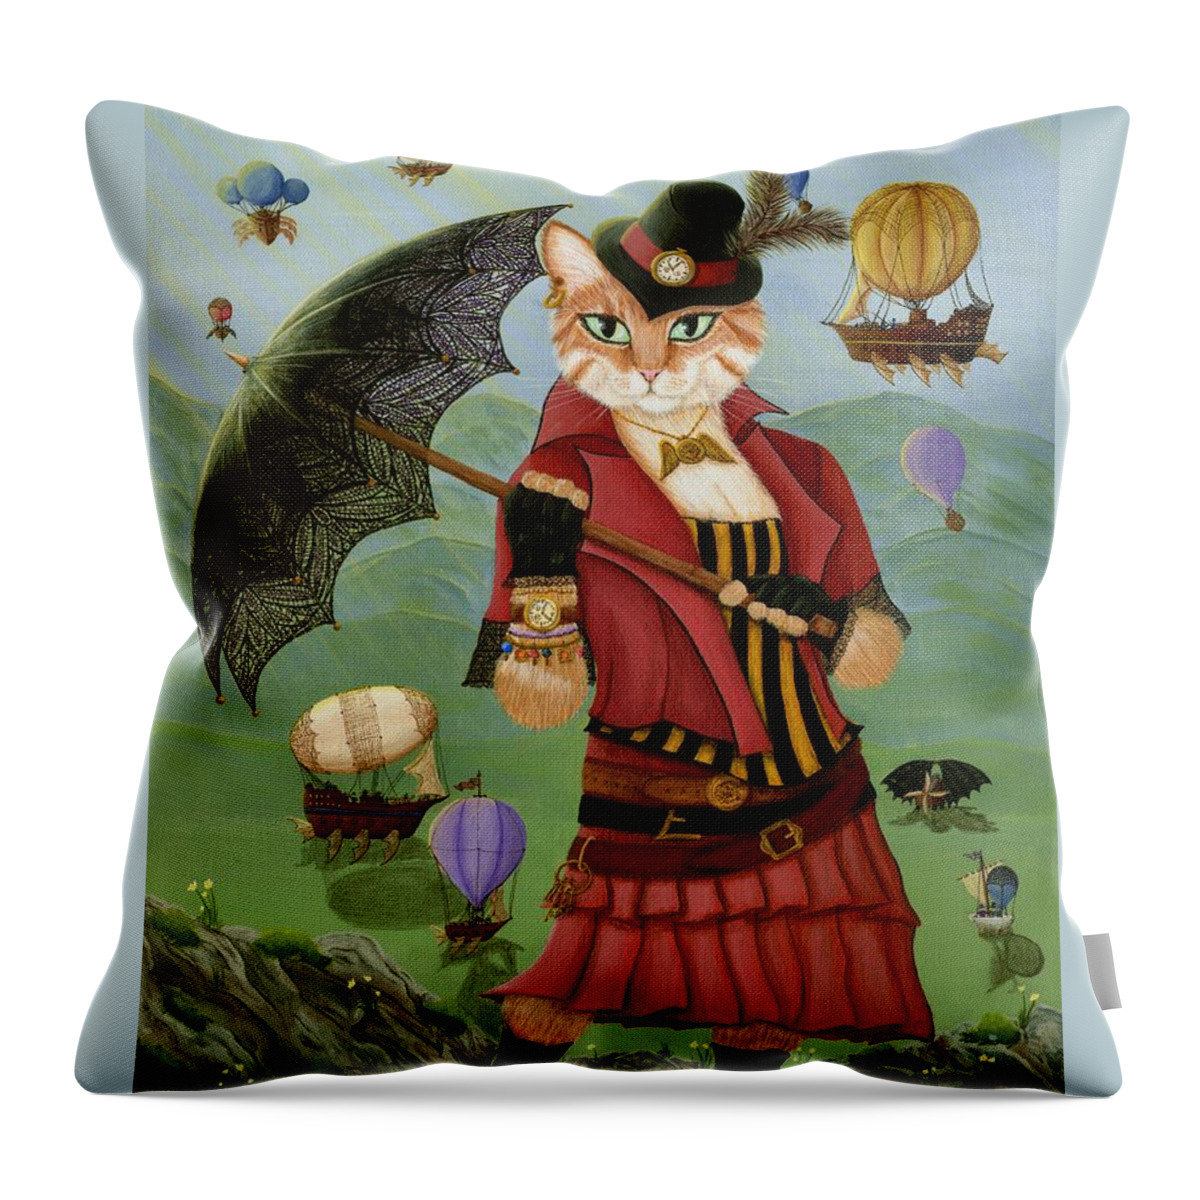 Steampunk Throw Pillow featuring the painting Steampunk Cat Gal - Victorian Cat by Carrie Hawks